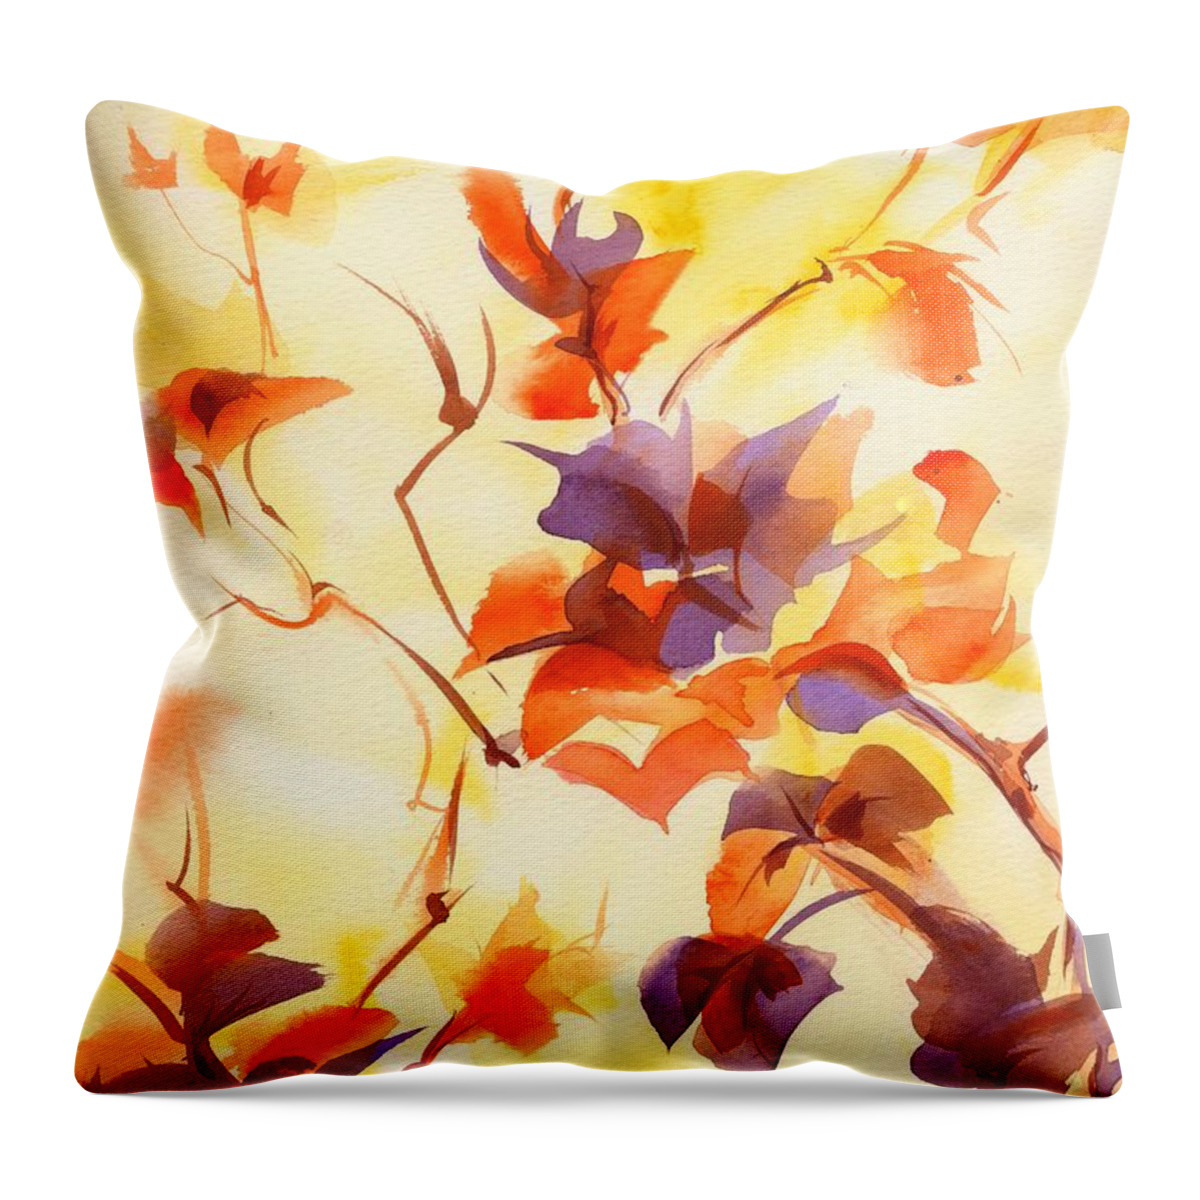 Landscape Throw Pillow featuring the painting Shadow Leaves by Summer Celeste